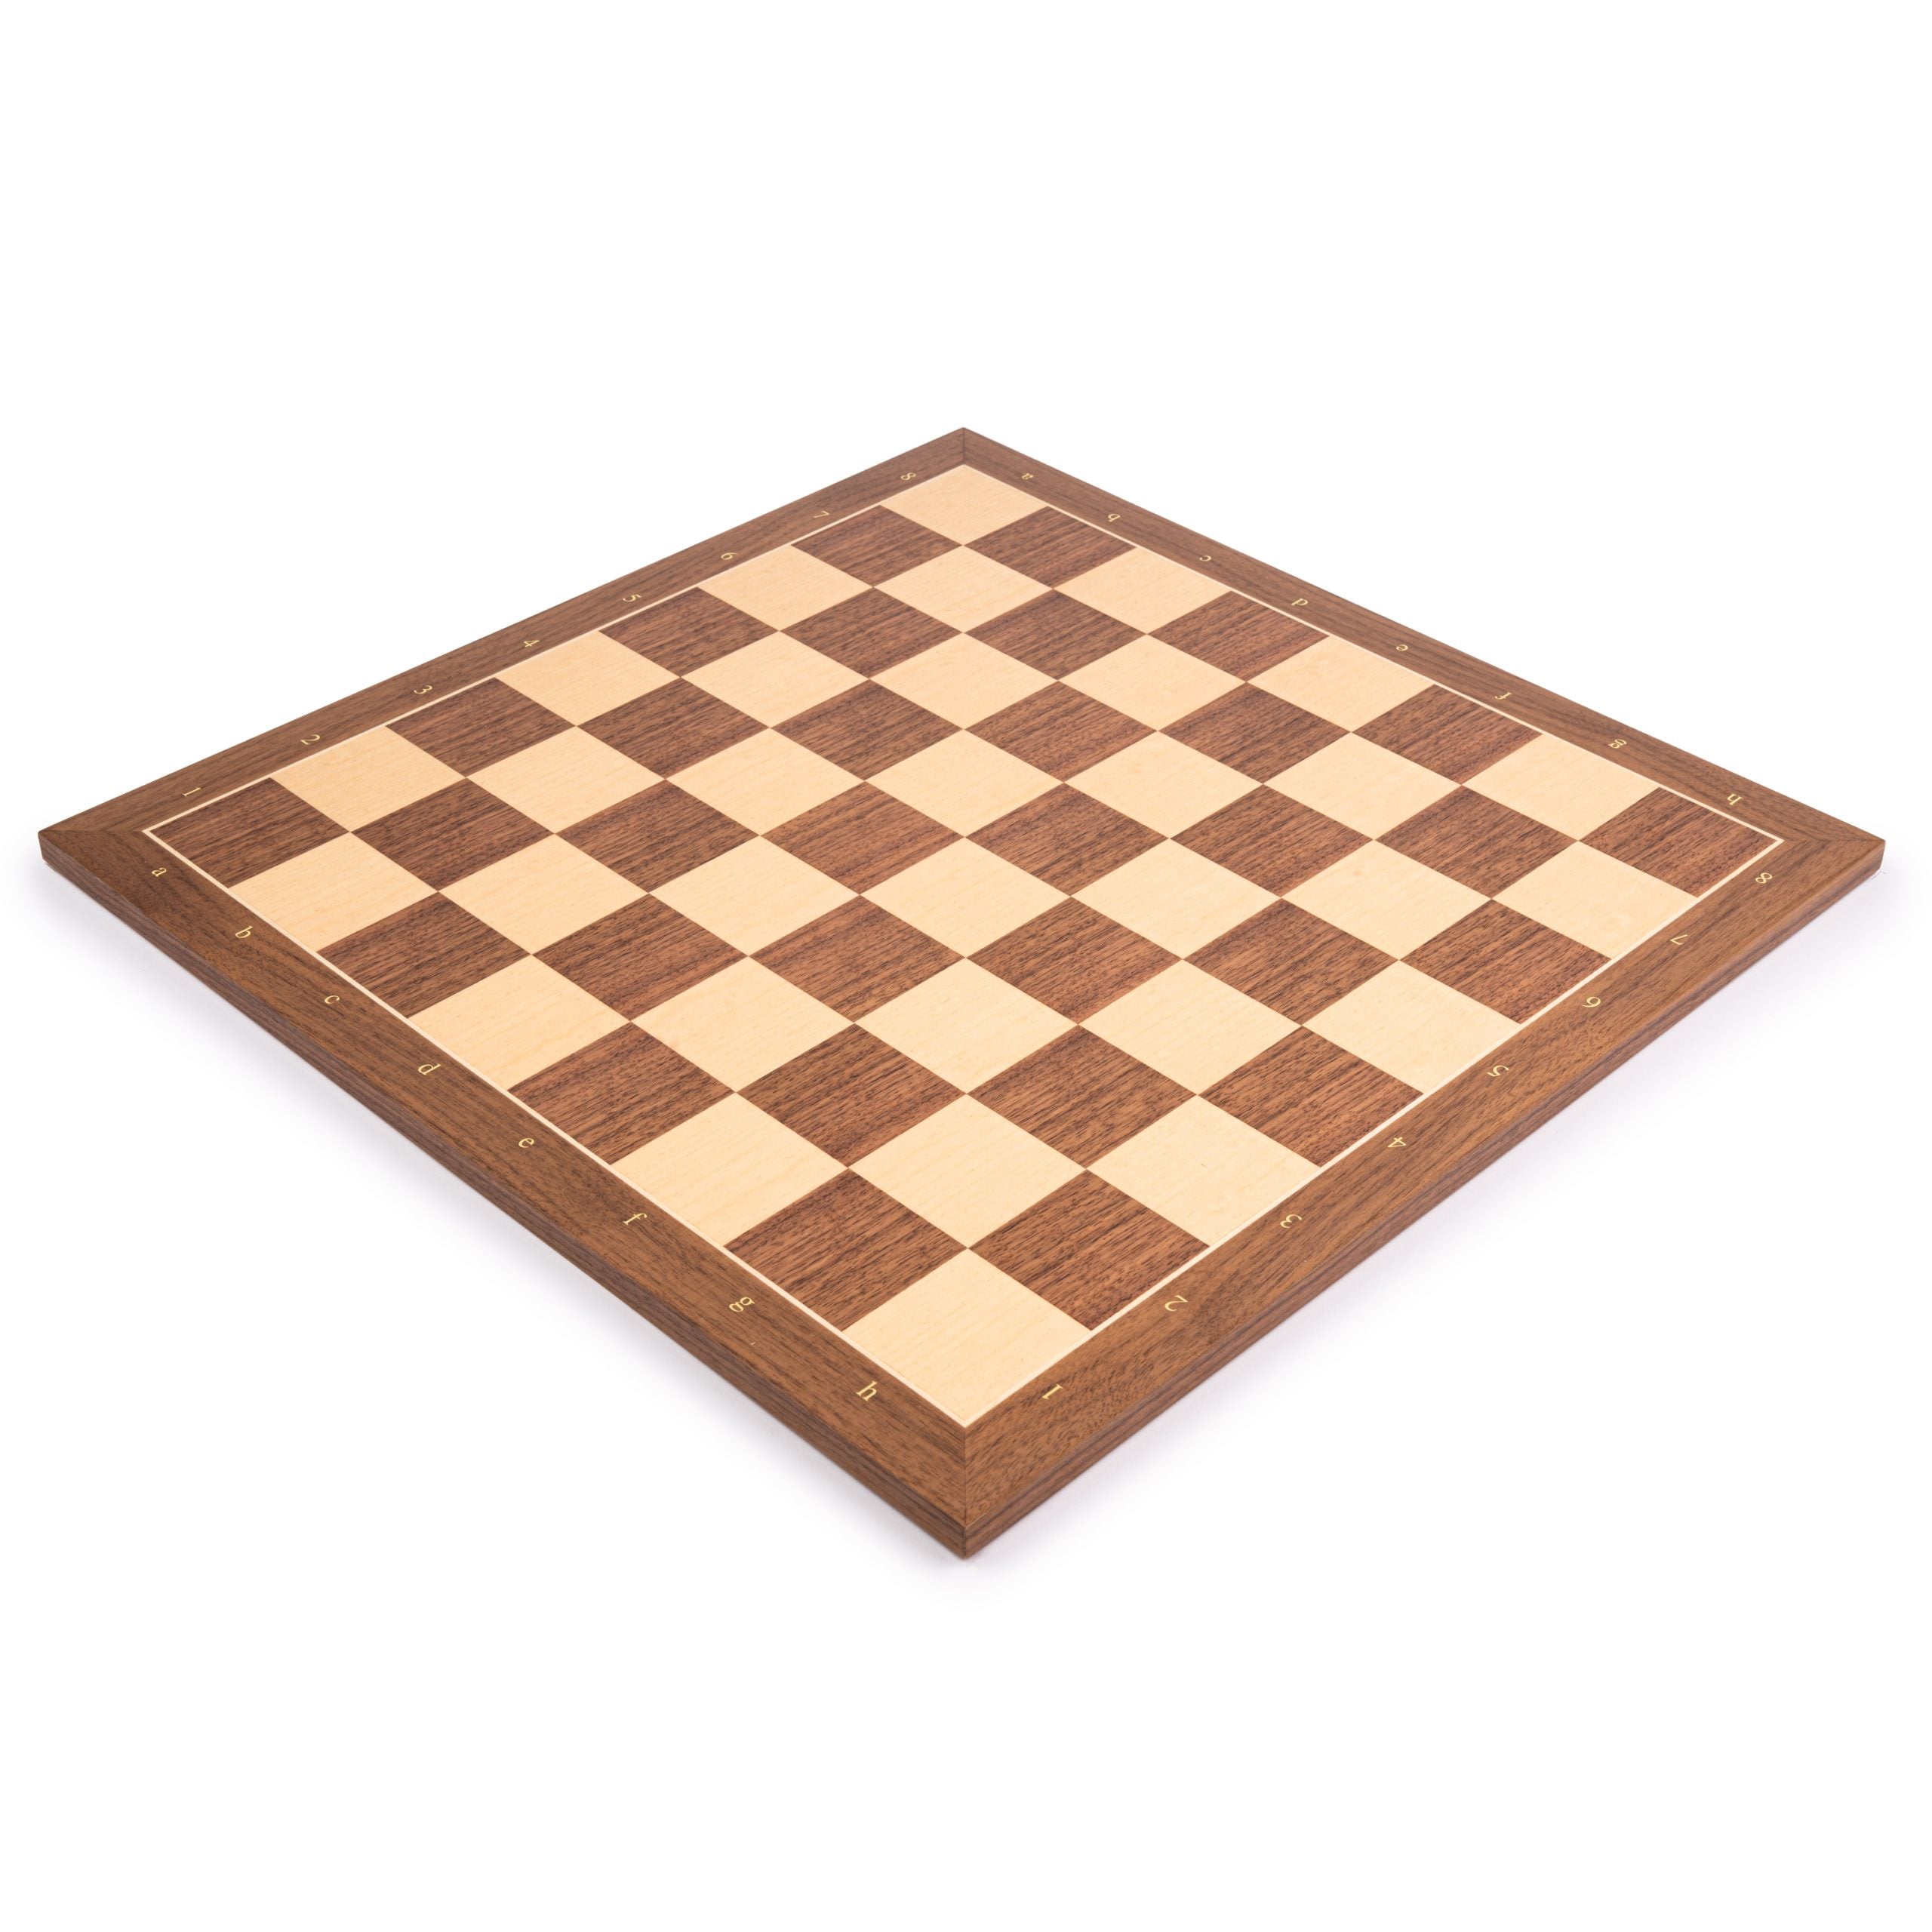 High-quality walnut wooden board with notation, 50mm field size